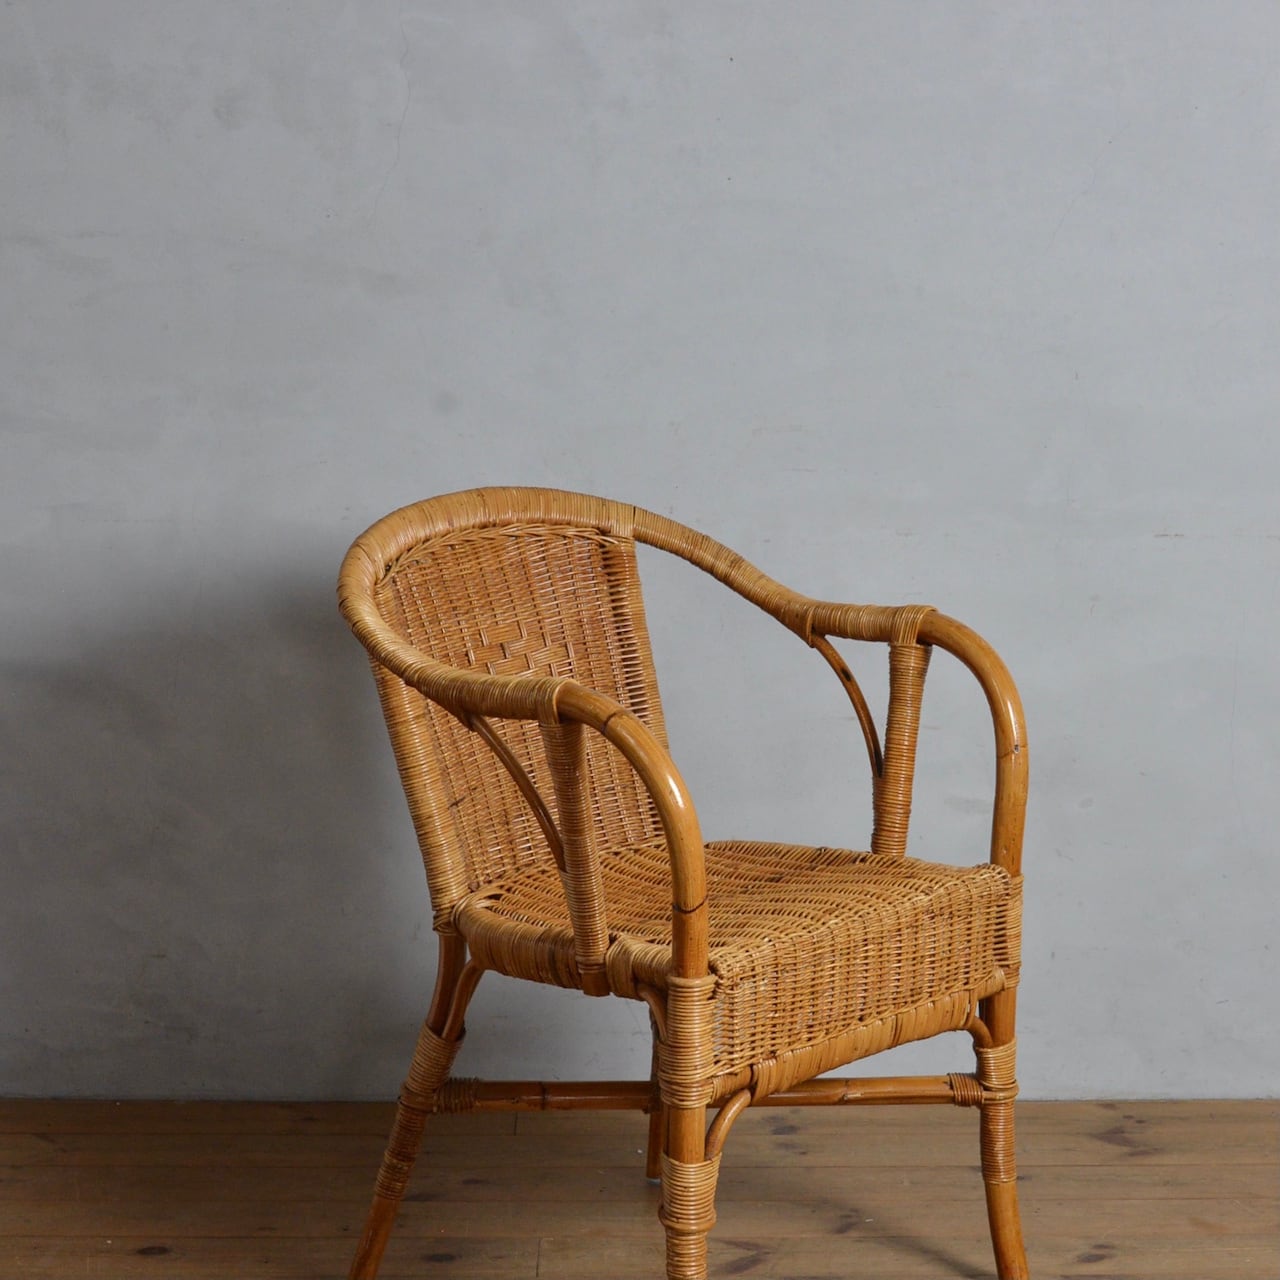 Rattan Chair / ラタン チェア 【A】〈椅子・籐張り・店舗什器〉112200 | SHABBY'S MARKETPLACE　 アンティーク・ヴィンテージ 家具や雑貨のお店 powered by BASE